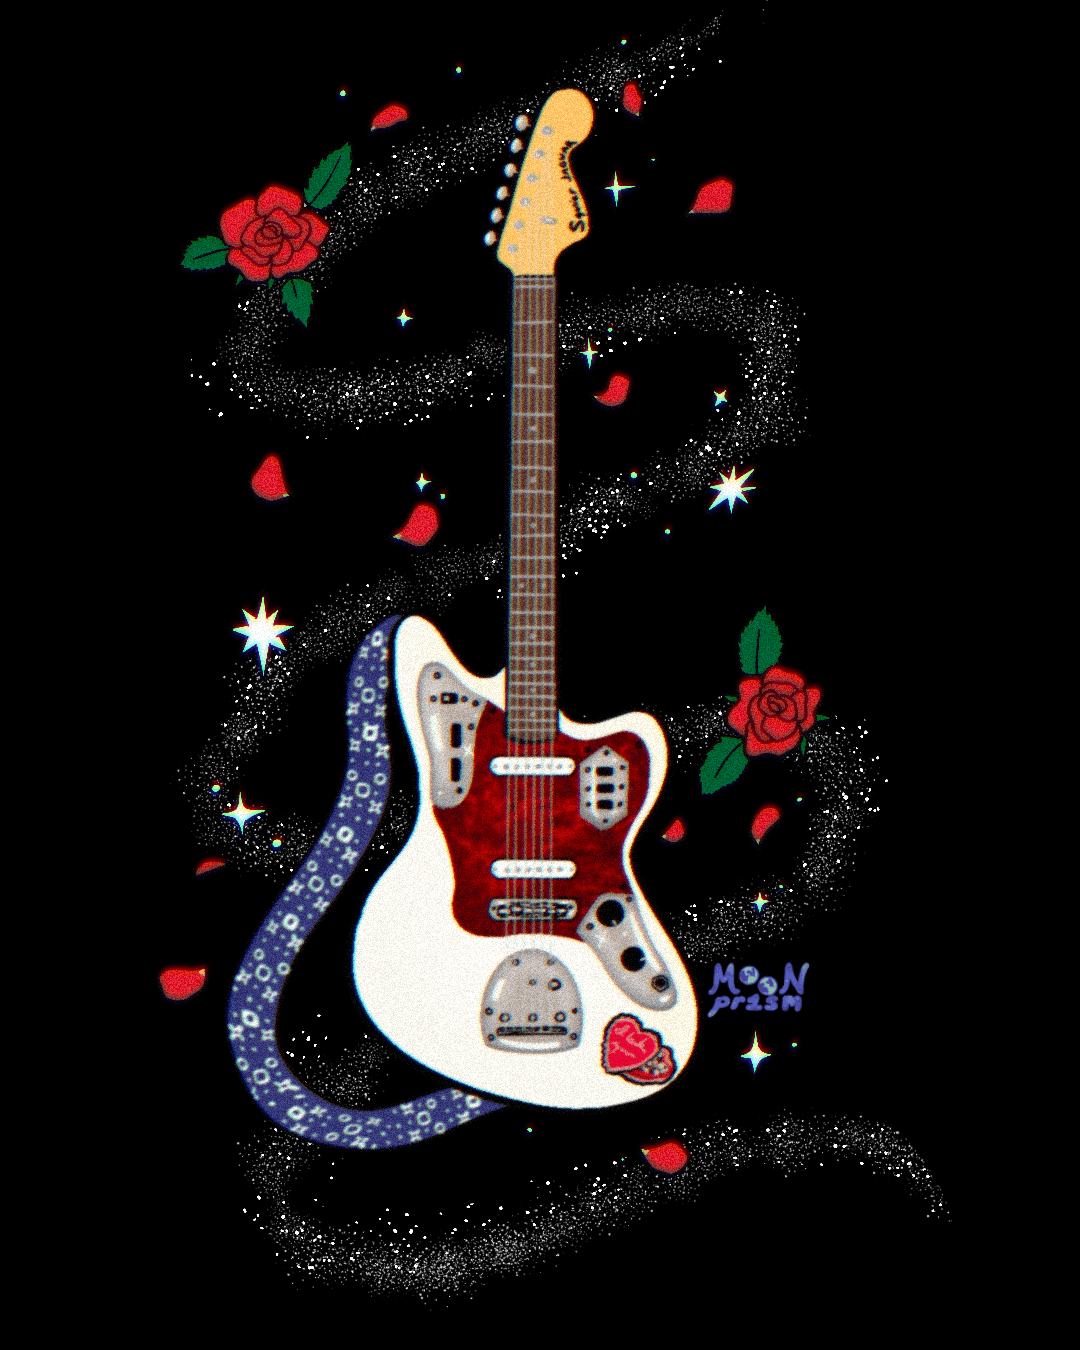 An illustration of a white guitar with a dark red pickguard, blue floral guitar strap, and heartshaped sticker surrounded by white sparkles and red roses and petals.